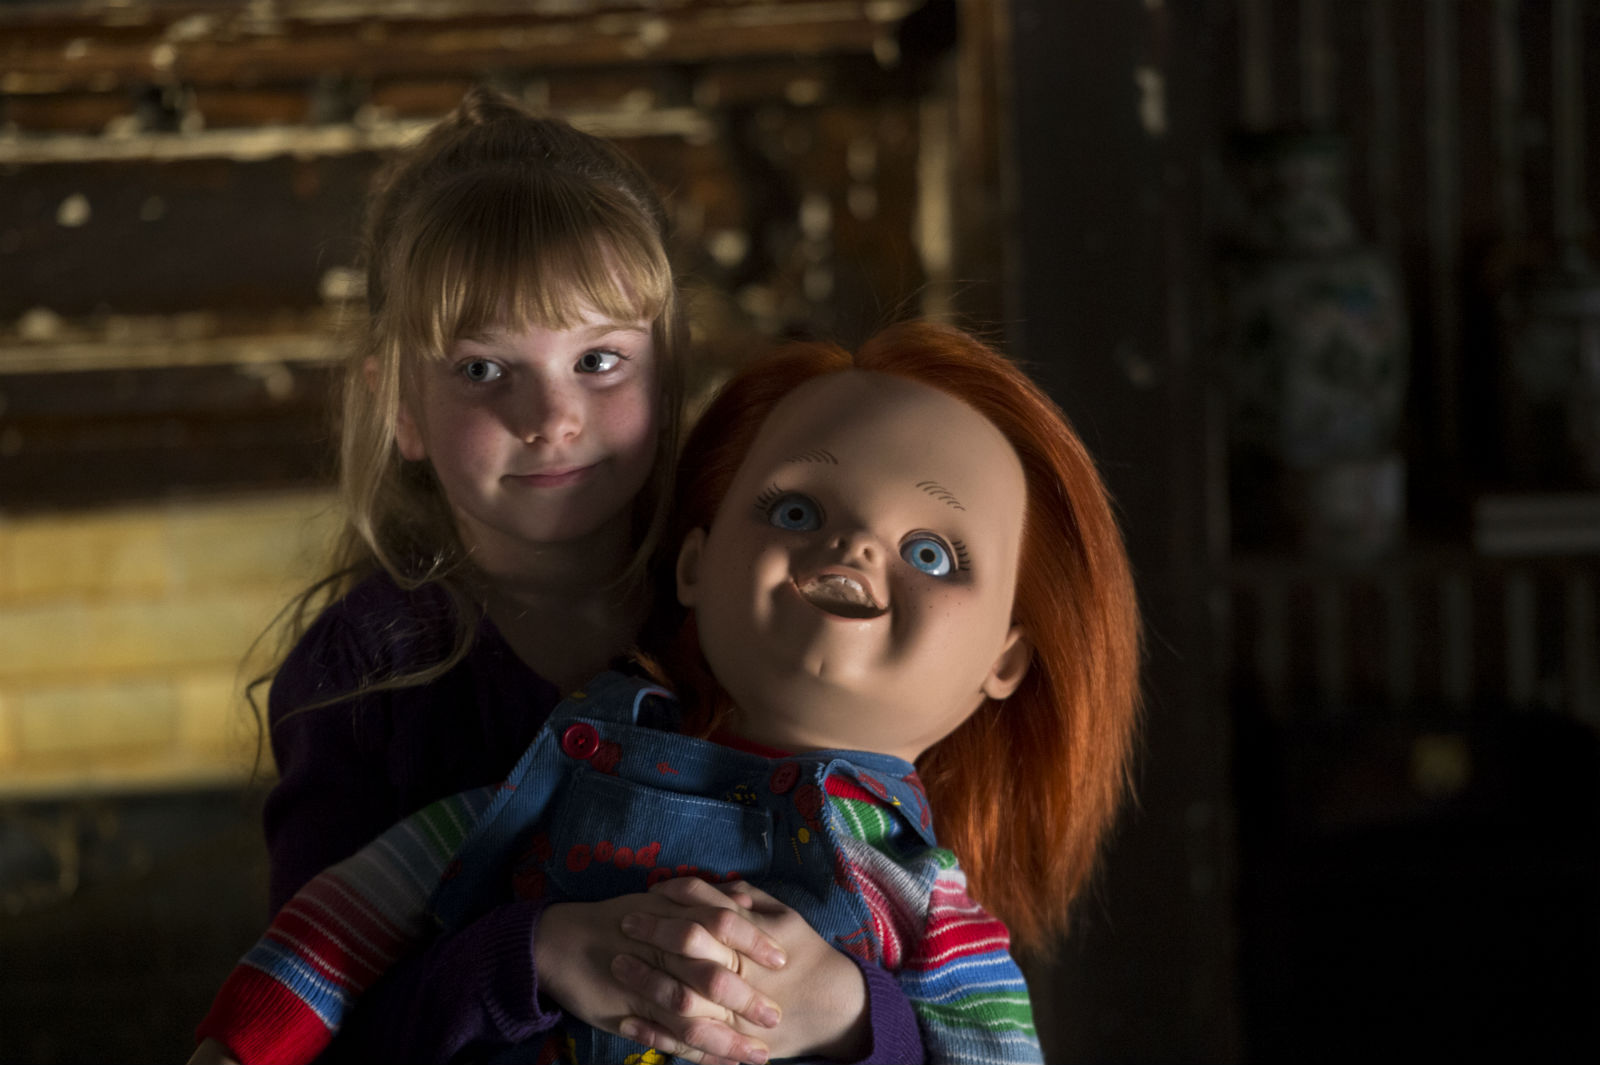 'Curse of Chucky' Blu-Ray Review: Franchise Reboot Resurrects Frights from Original